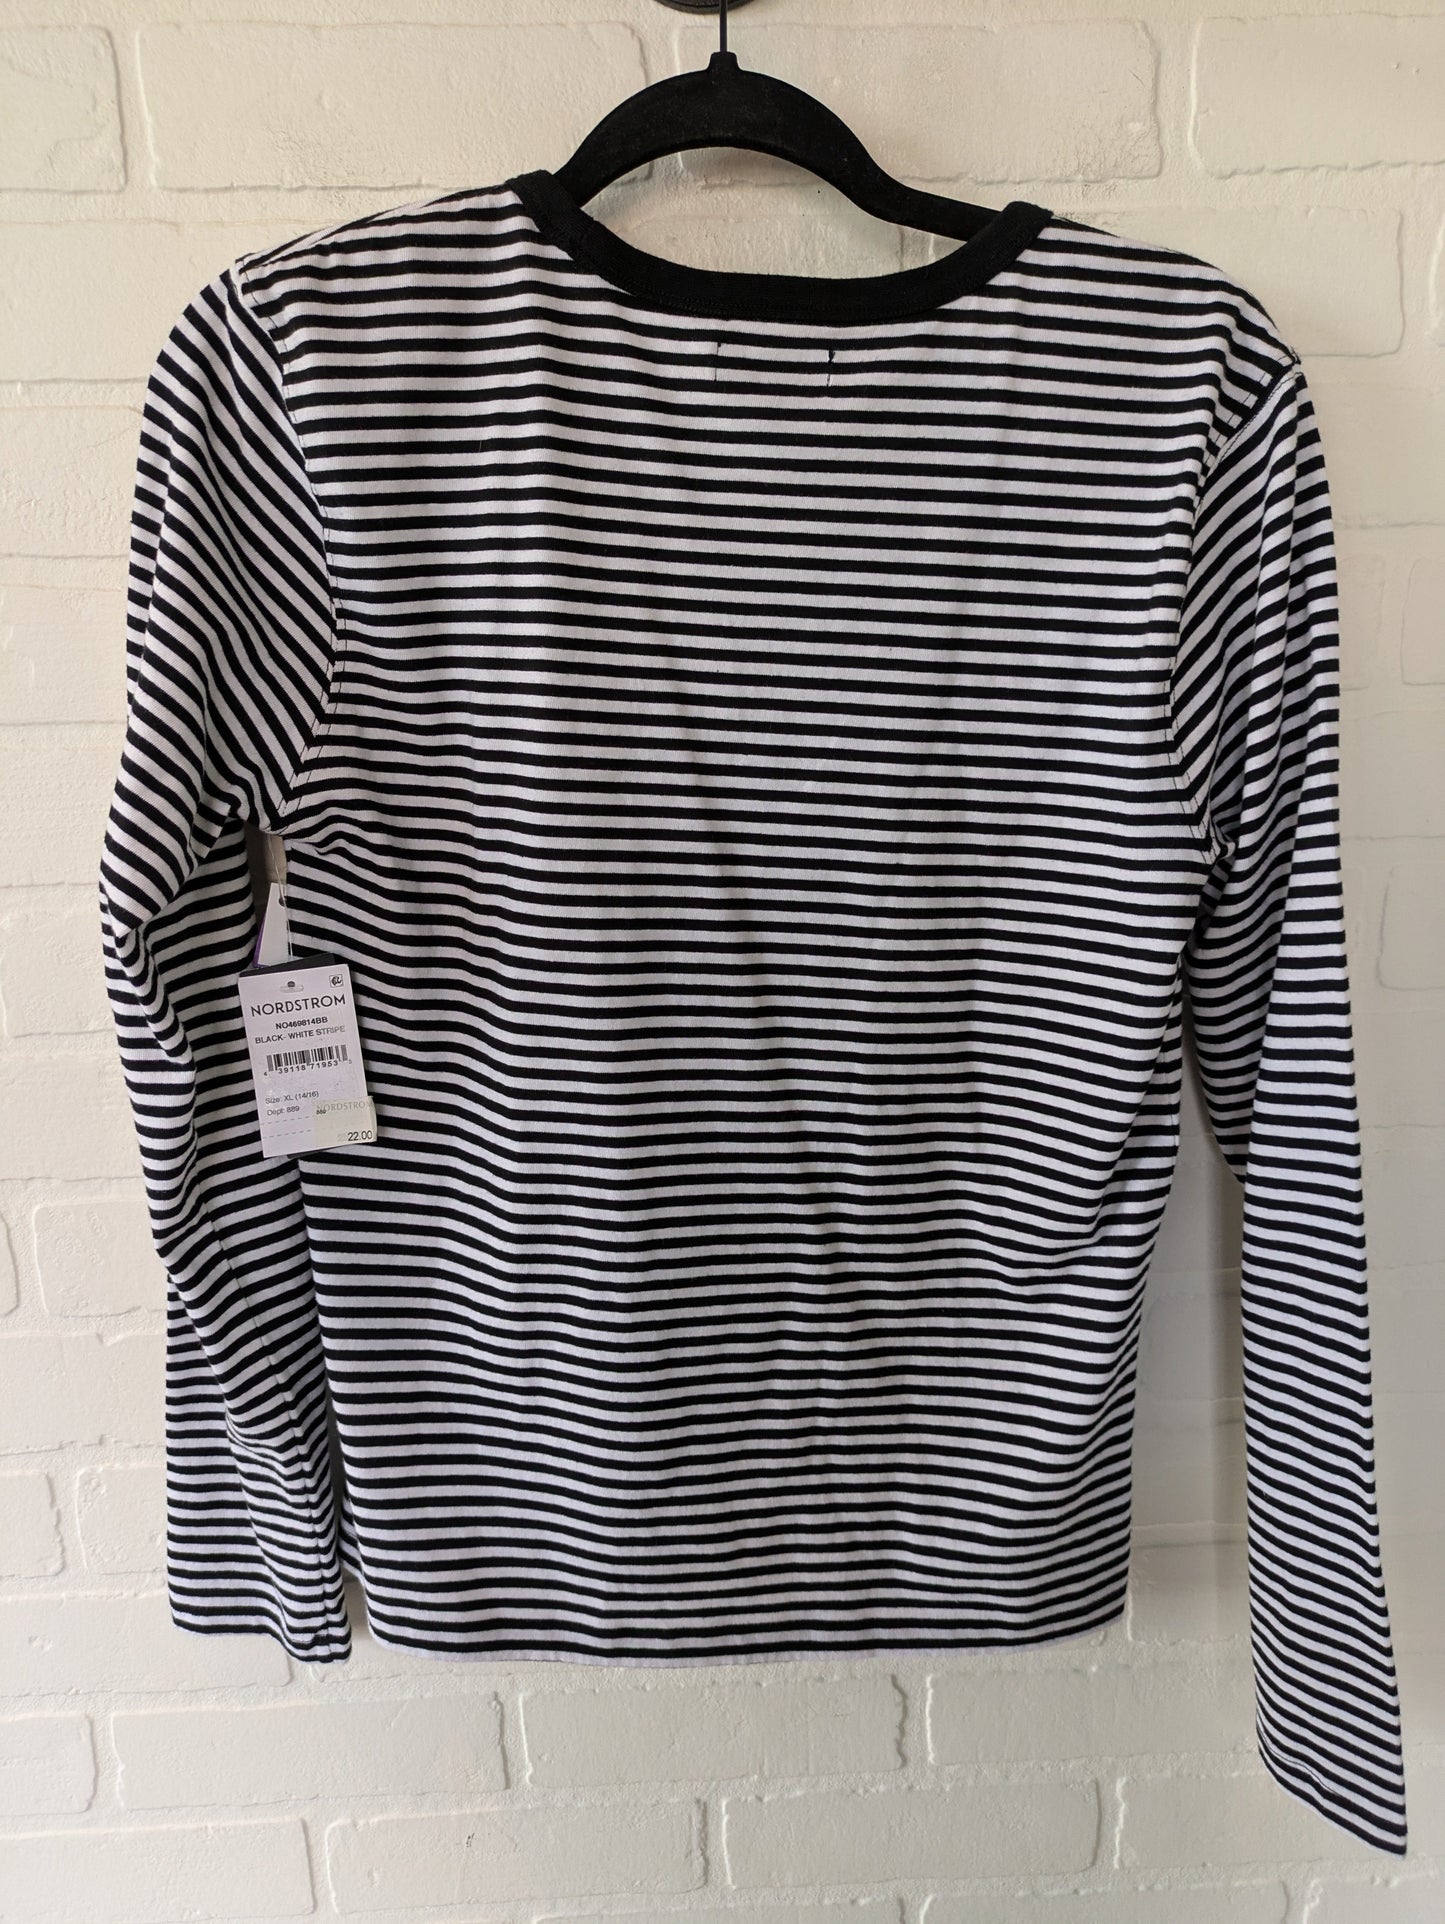 Black & White Top Long Sleeve Nordstrom, Size Xl